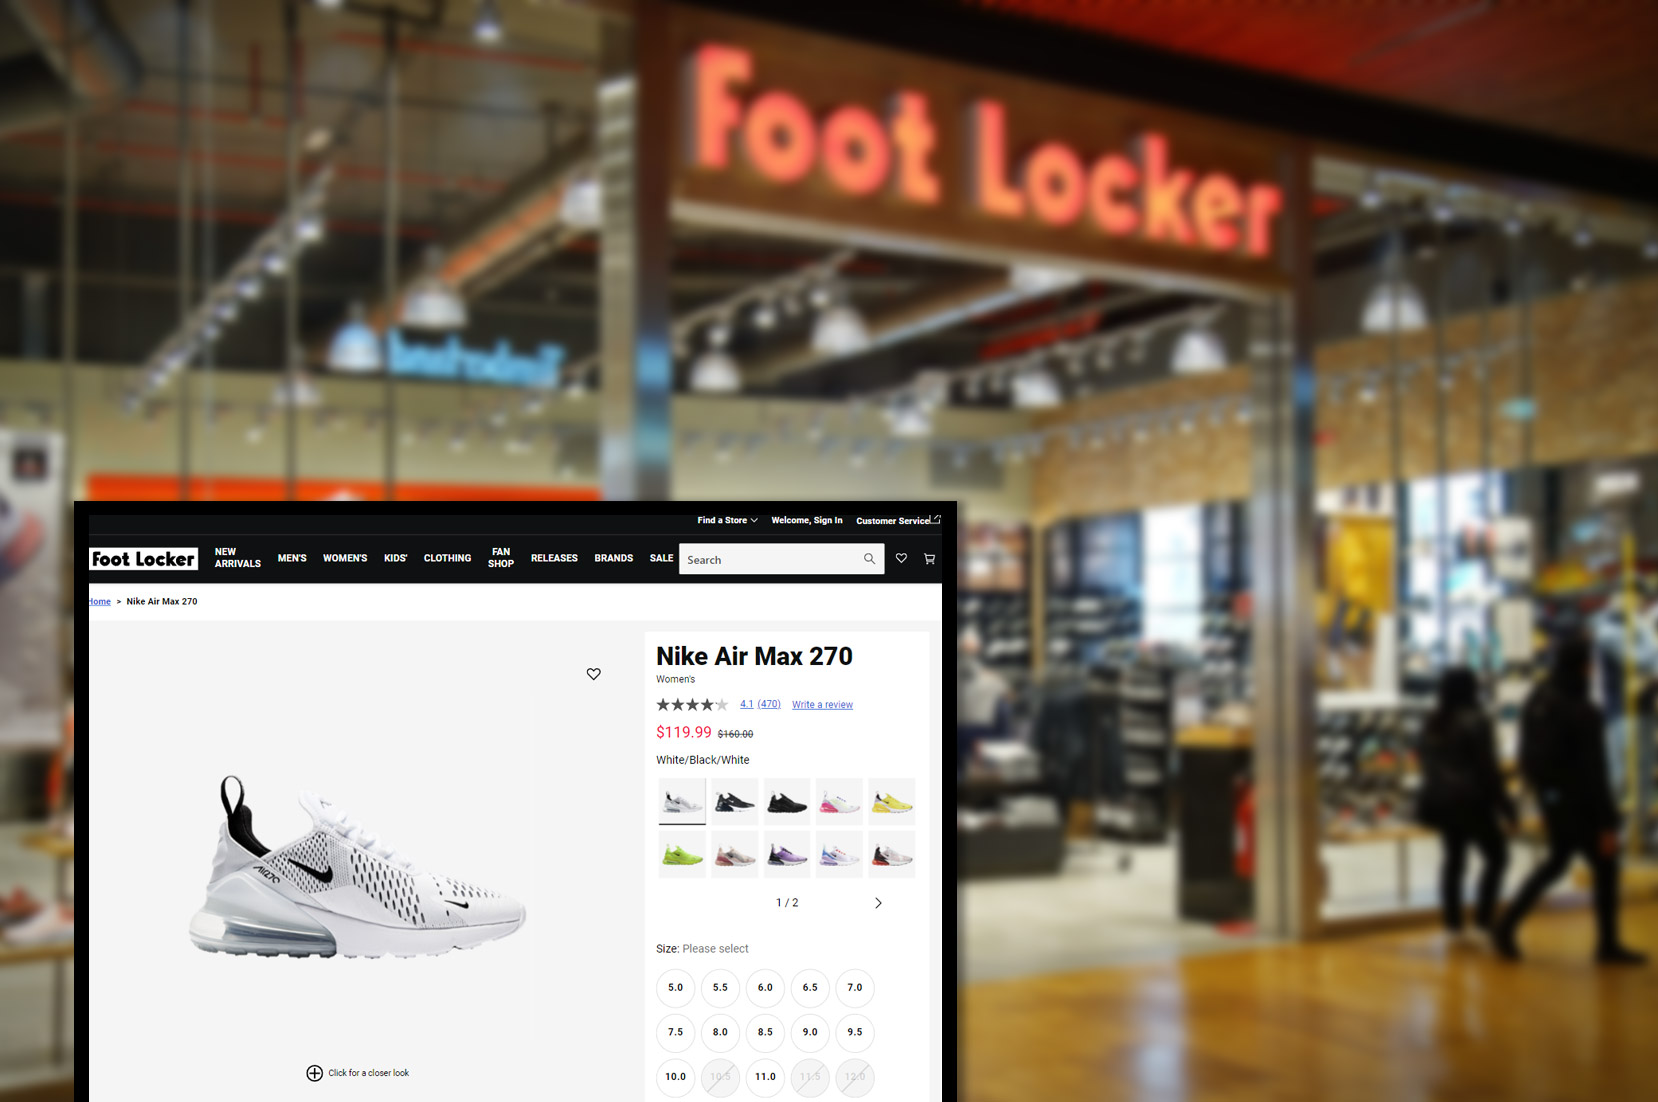 footlocker-comproduct-pricing-information-and-image-scraping-services